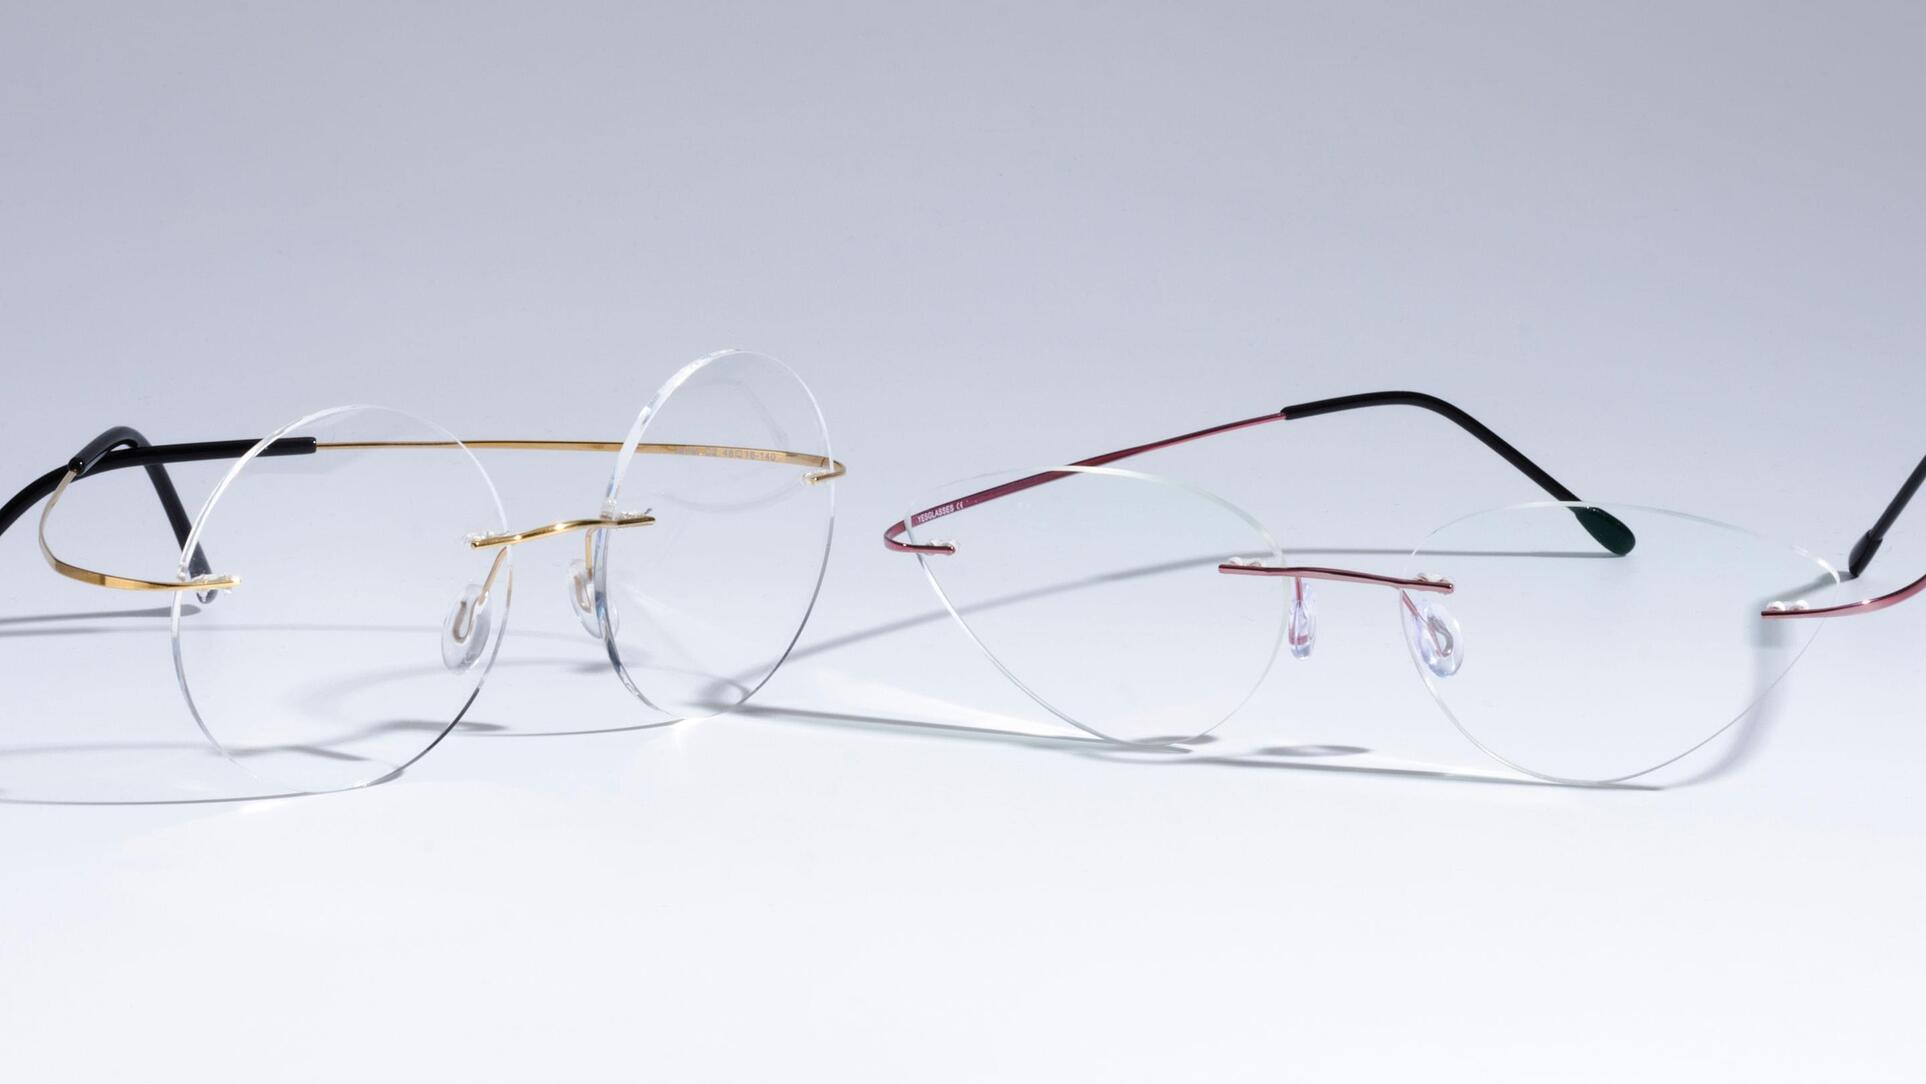 Compare frameless glasses, including round and cat eye.